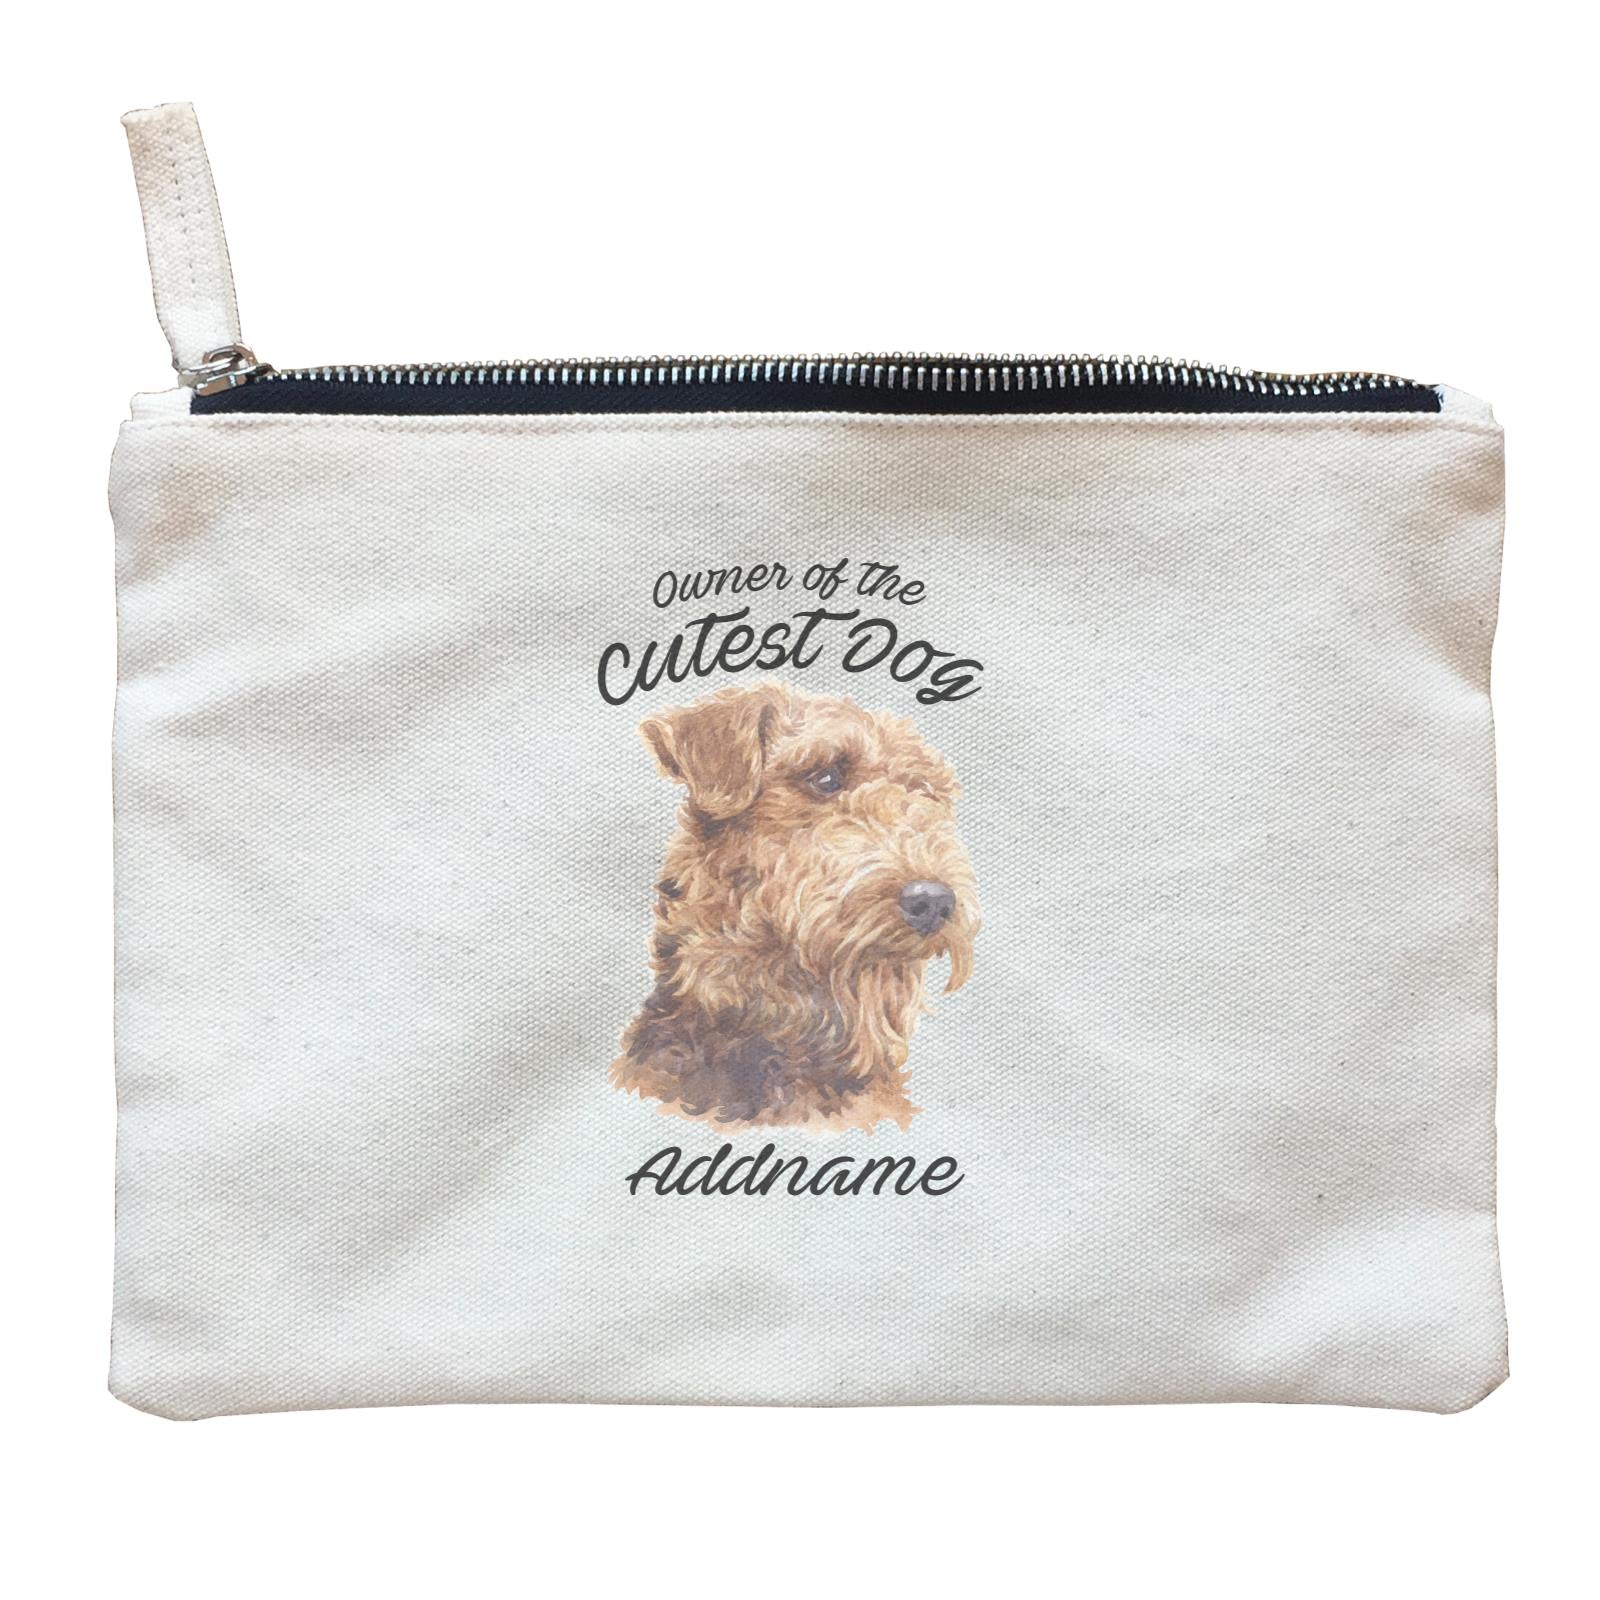 Watercolor Dog Owner Of The Cutest Dog Airedale Terrier Addname Zipper Pouch